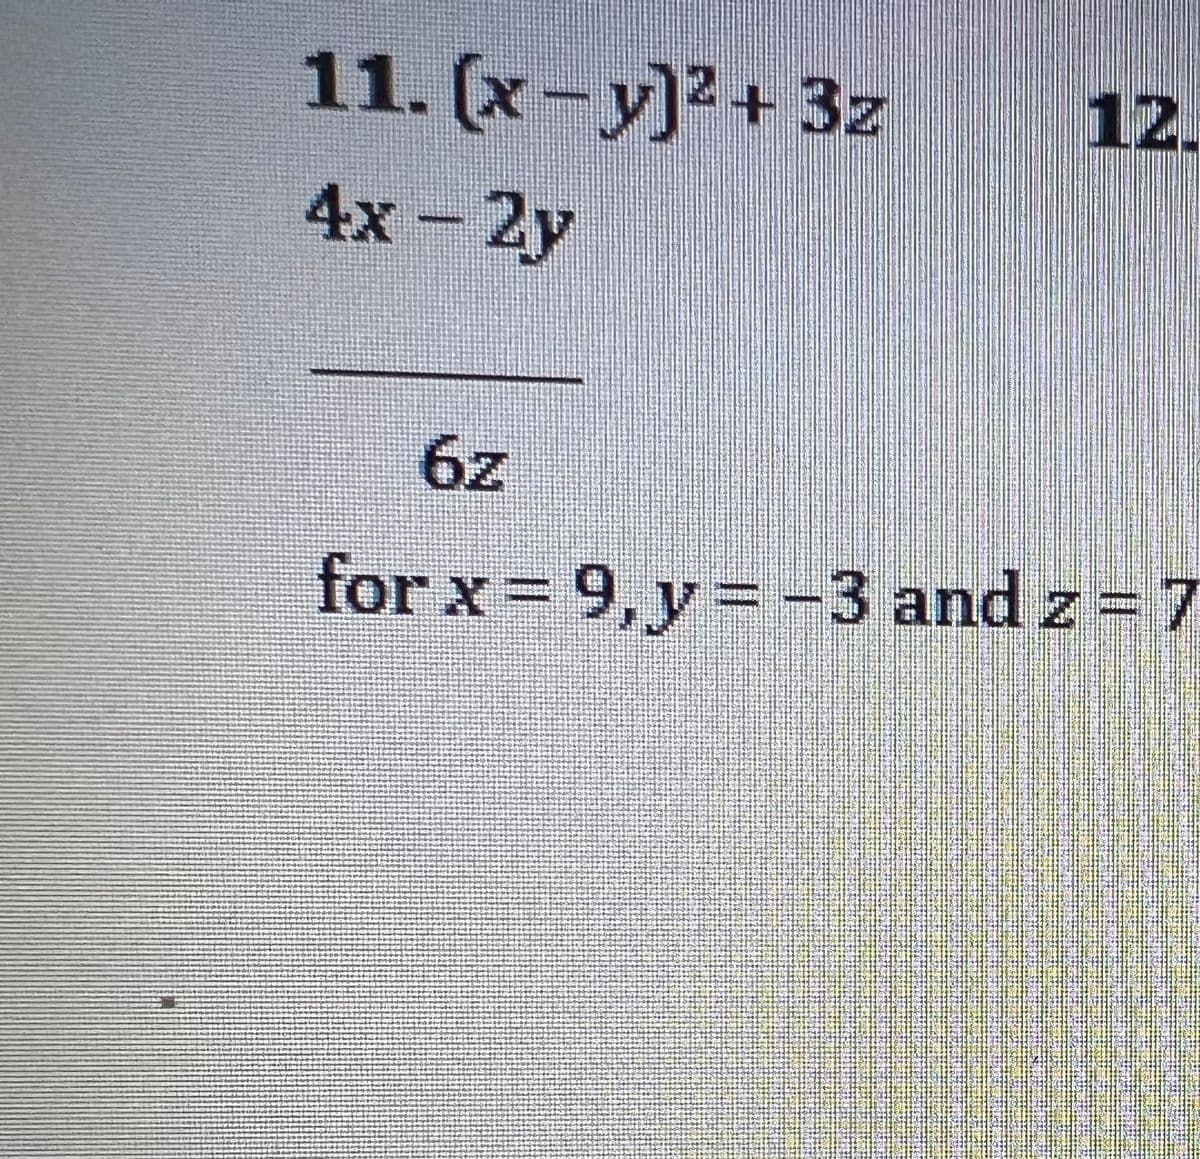 11. (x- y]² + 3z
12.
4x - 2y
6z
for x = 9, y= -3 and z = 7
